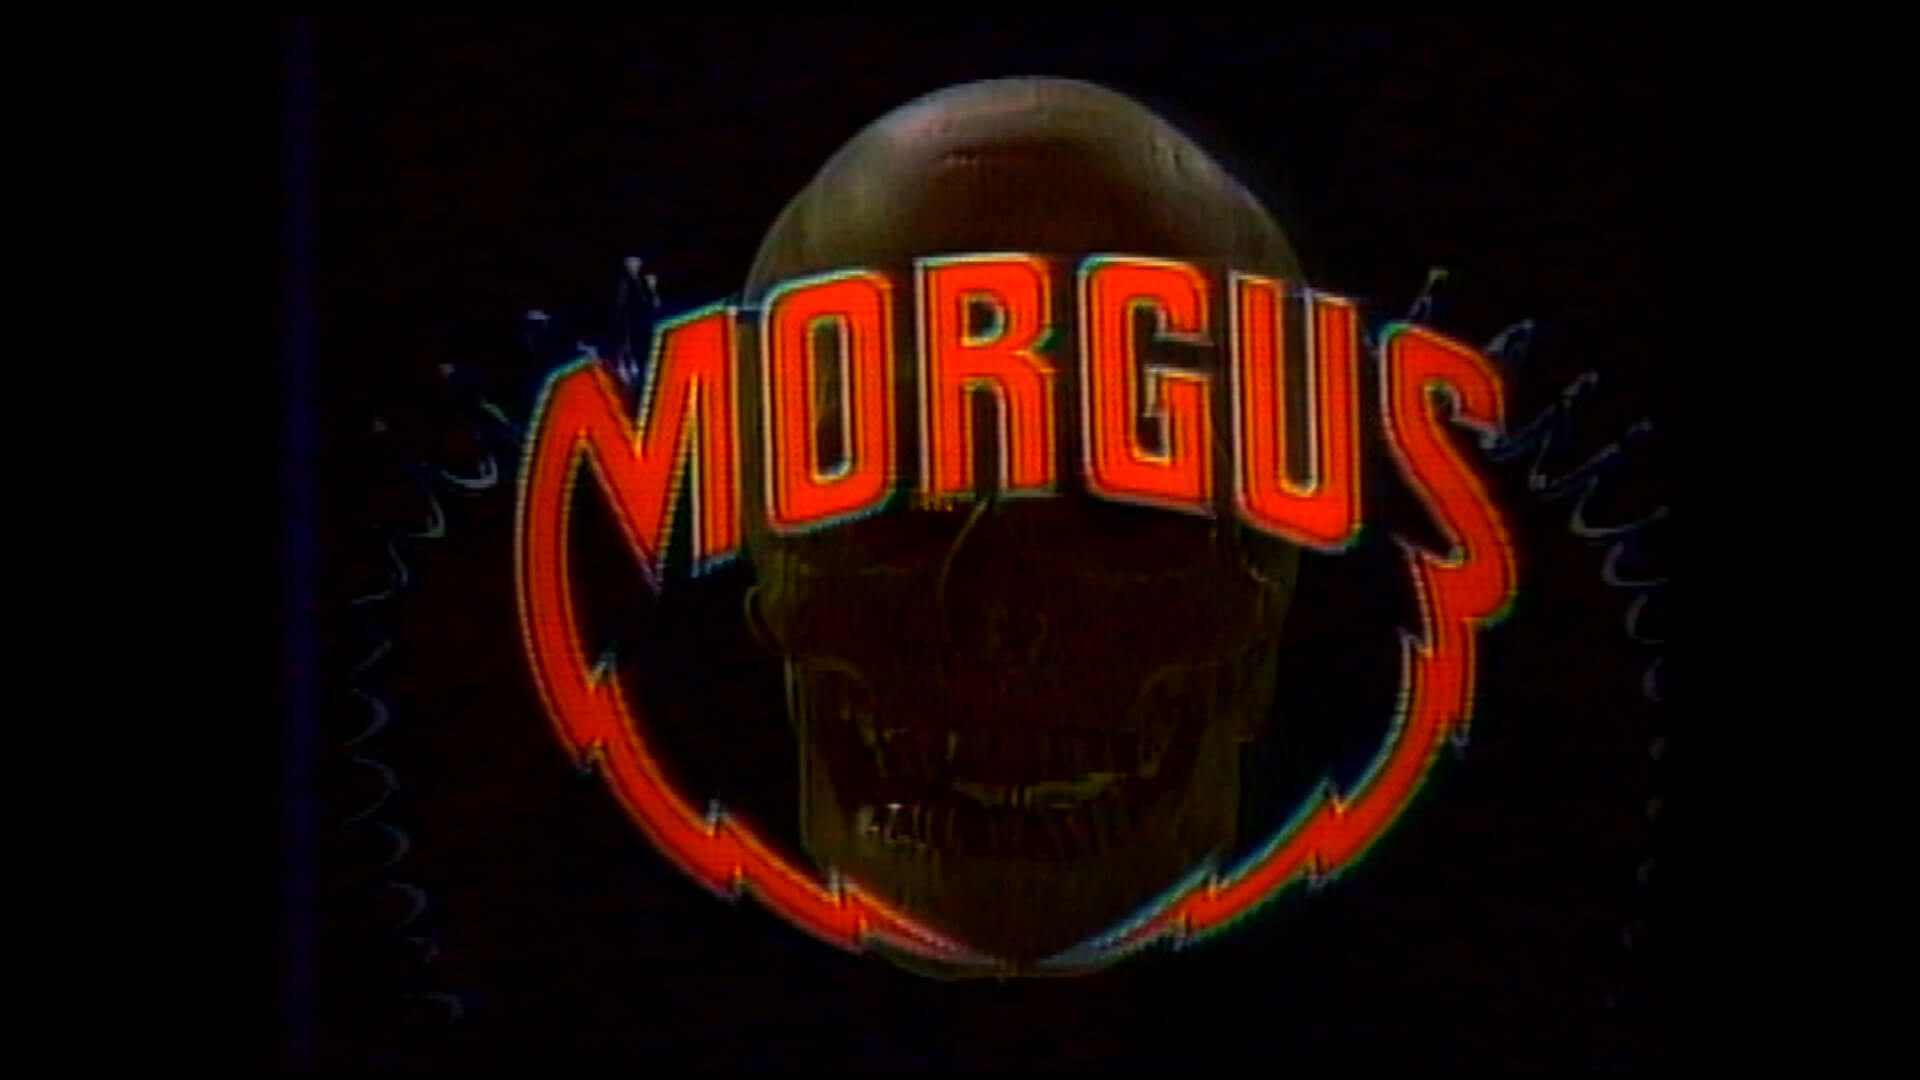 The logo of Morgus the Magnificent (Photo: WDSU)